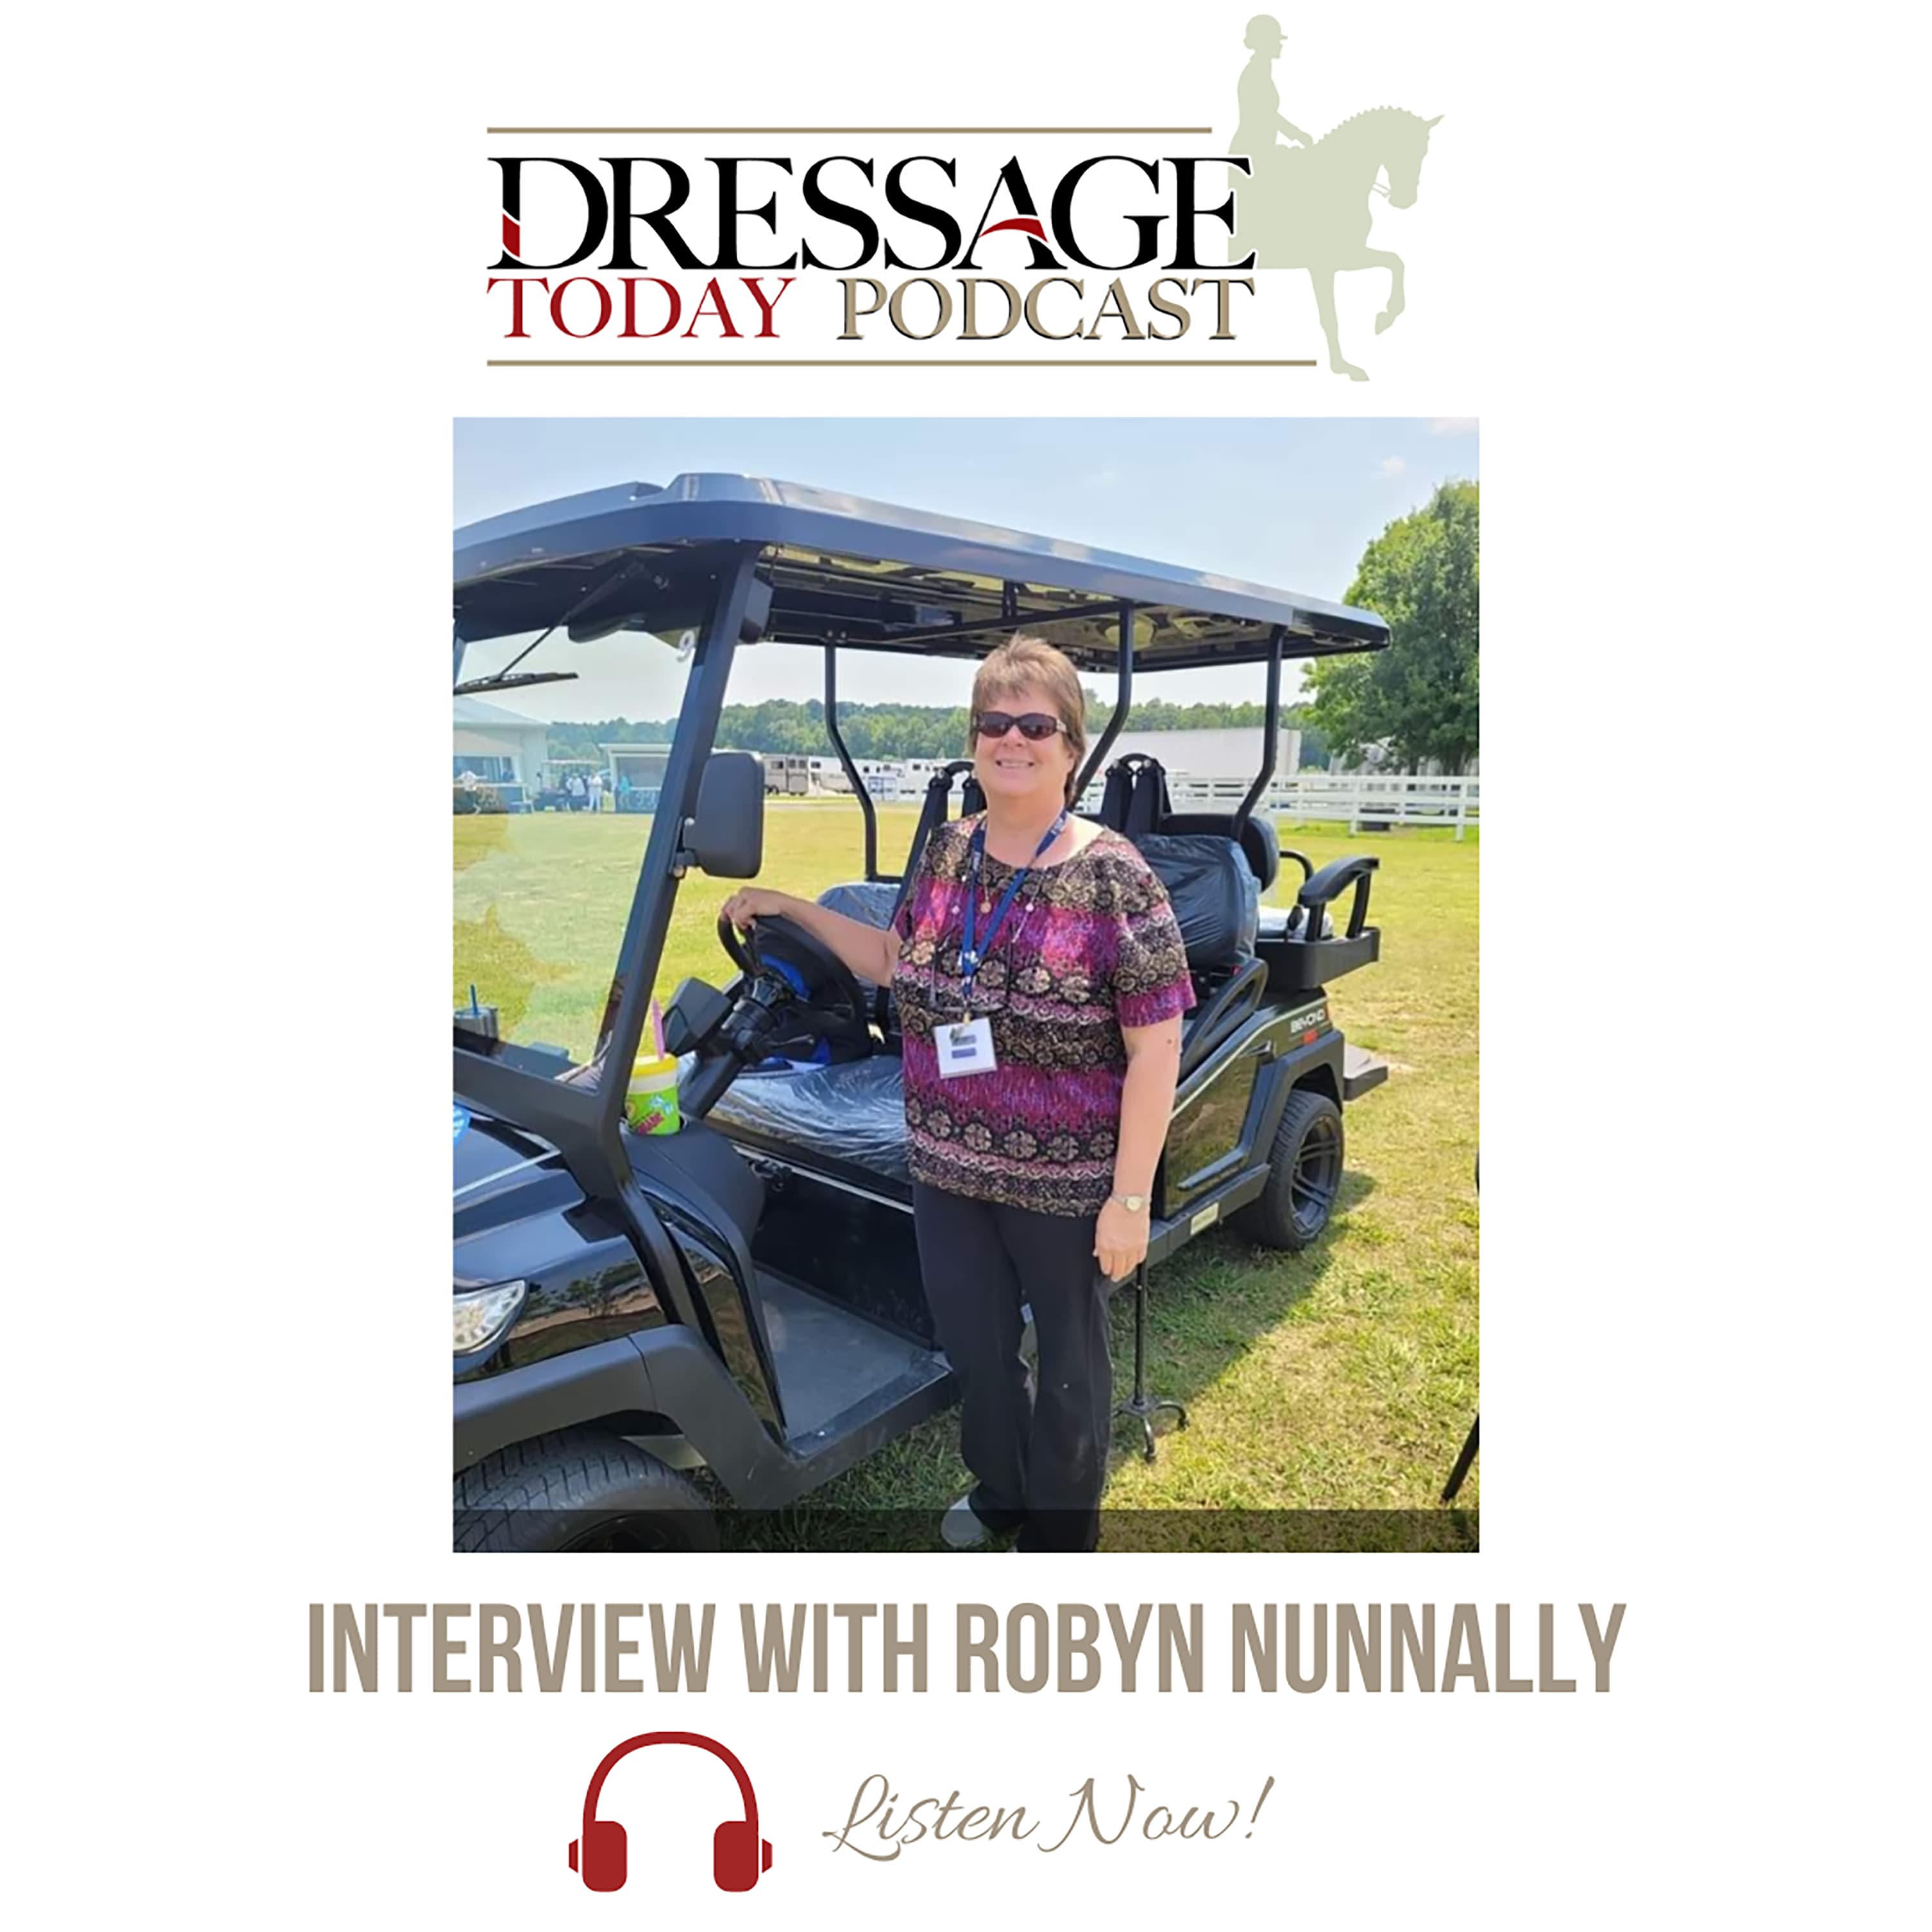 Interview with Robyn Nunnally - Dressage Today Podcast